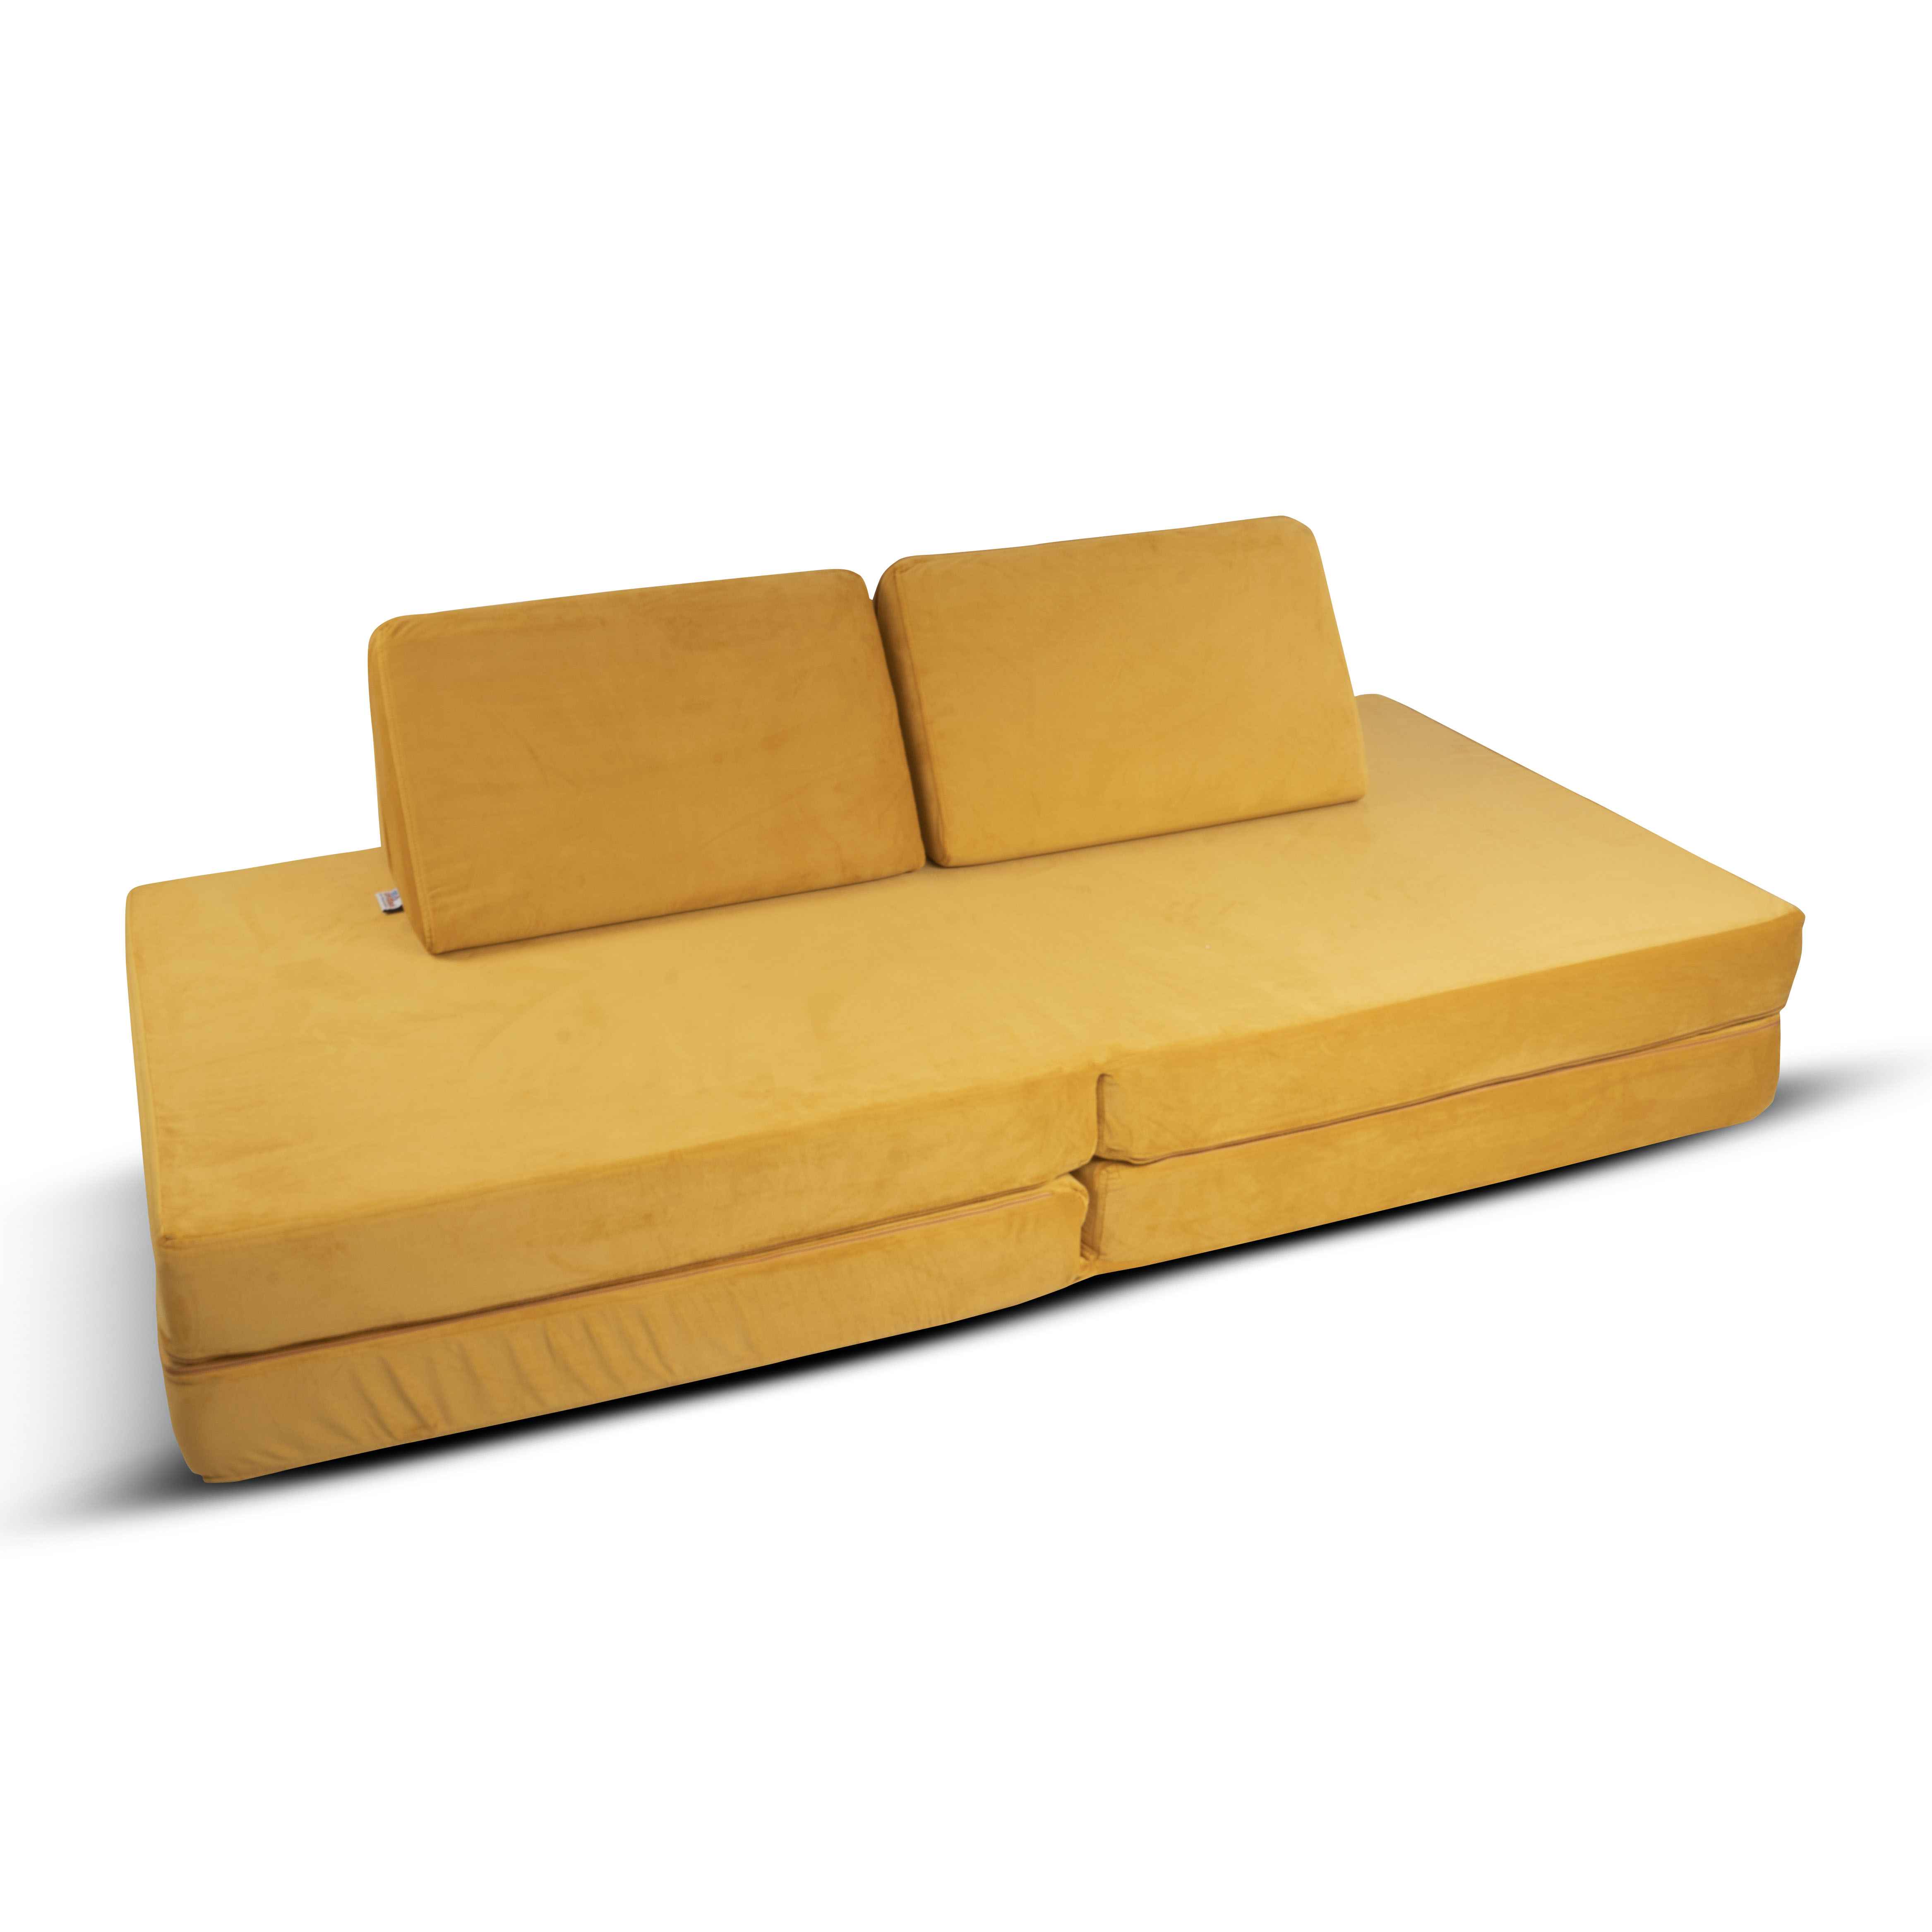 Cosmos Play Couch - Lagoon Blue